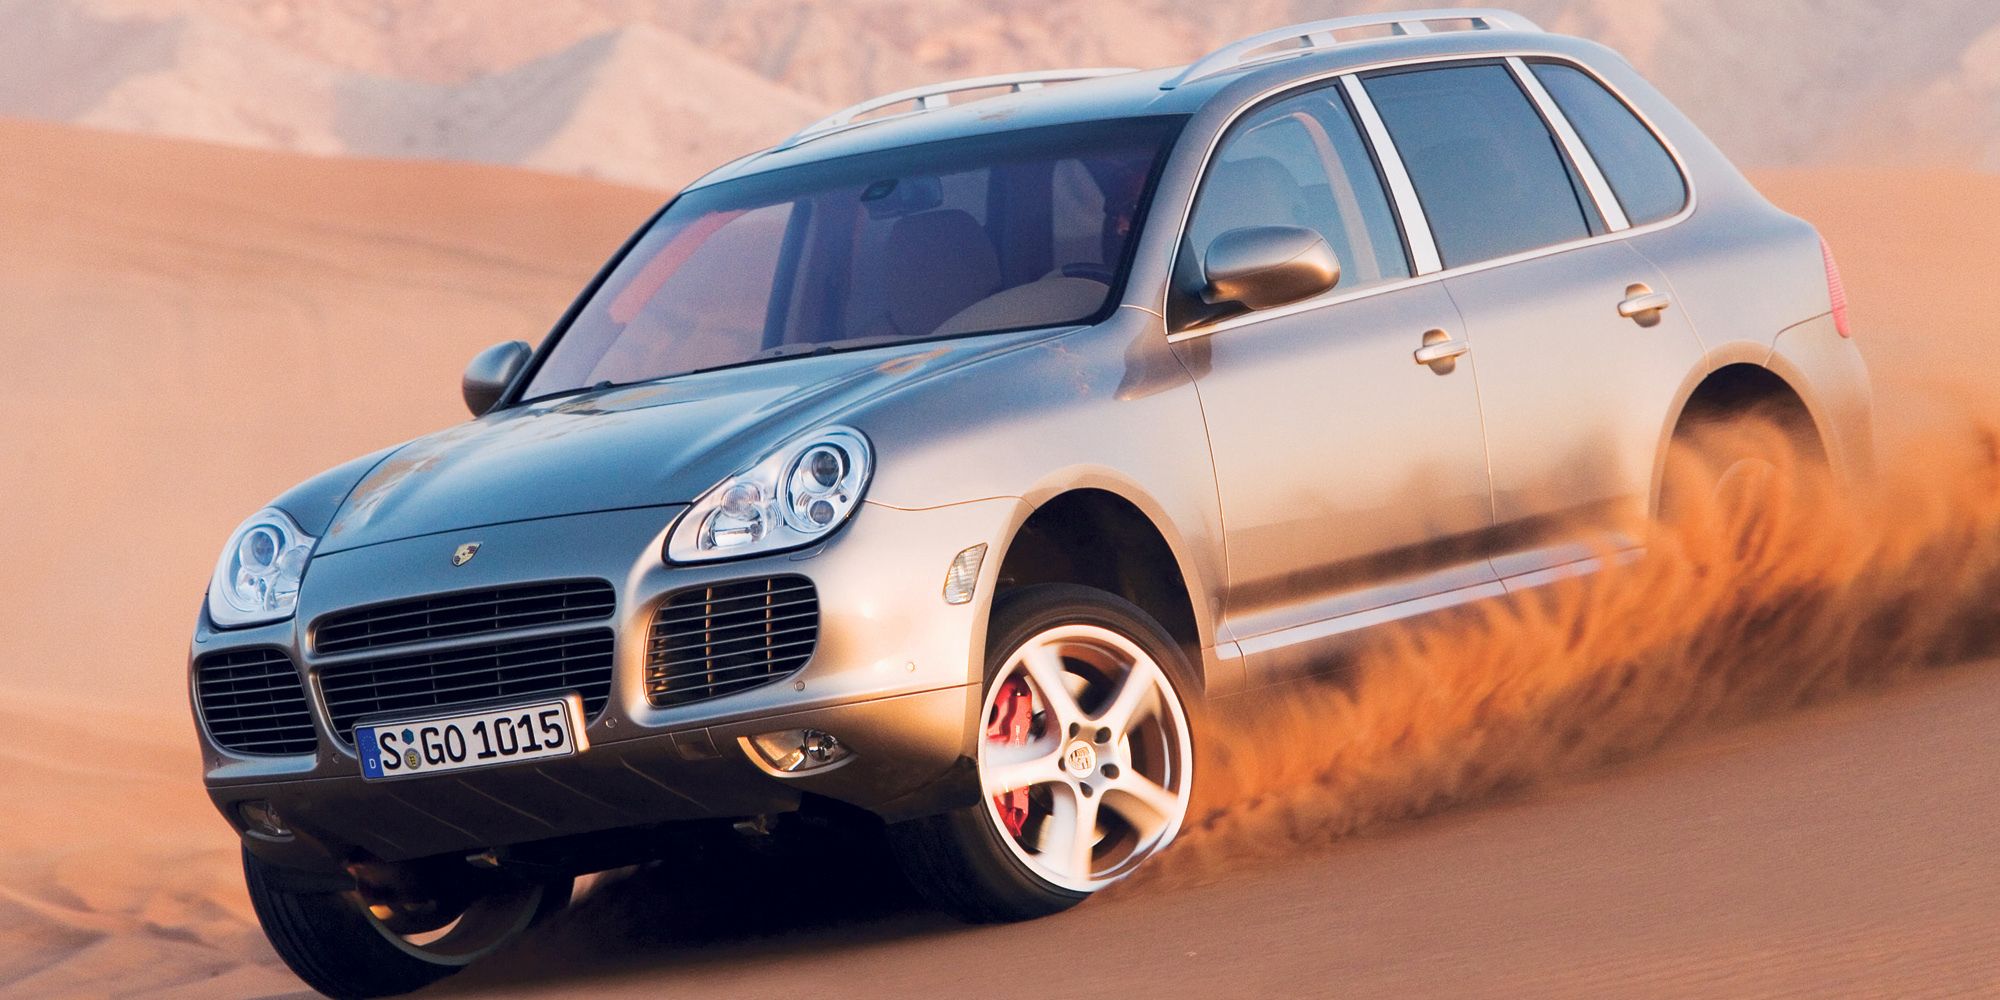 Front 3/4 view of the Cayenne Turbo on a sand dune